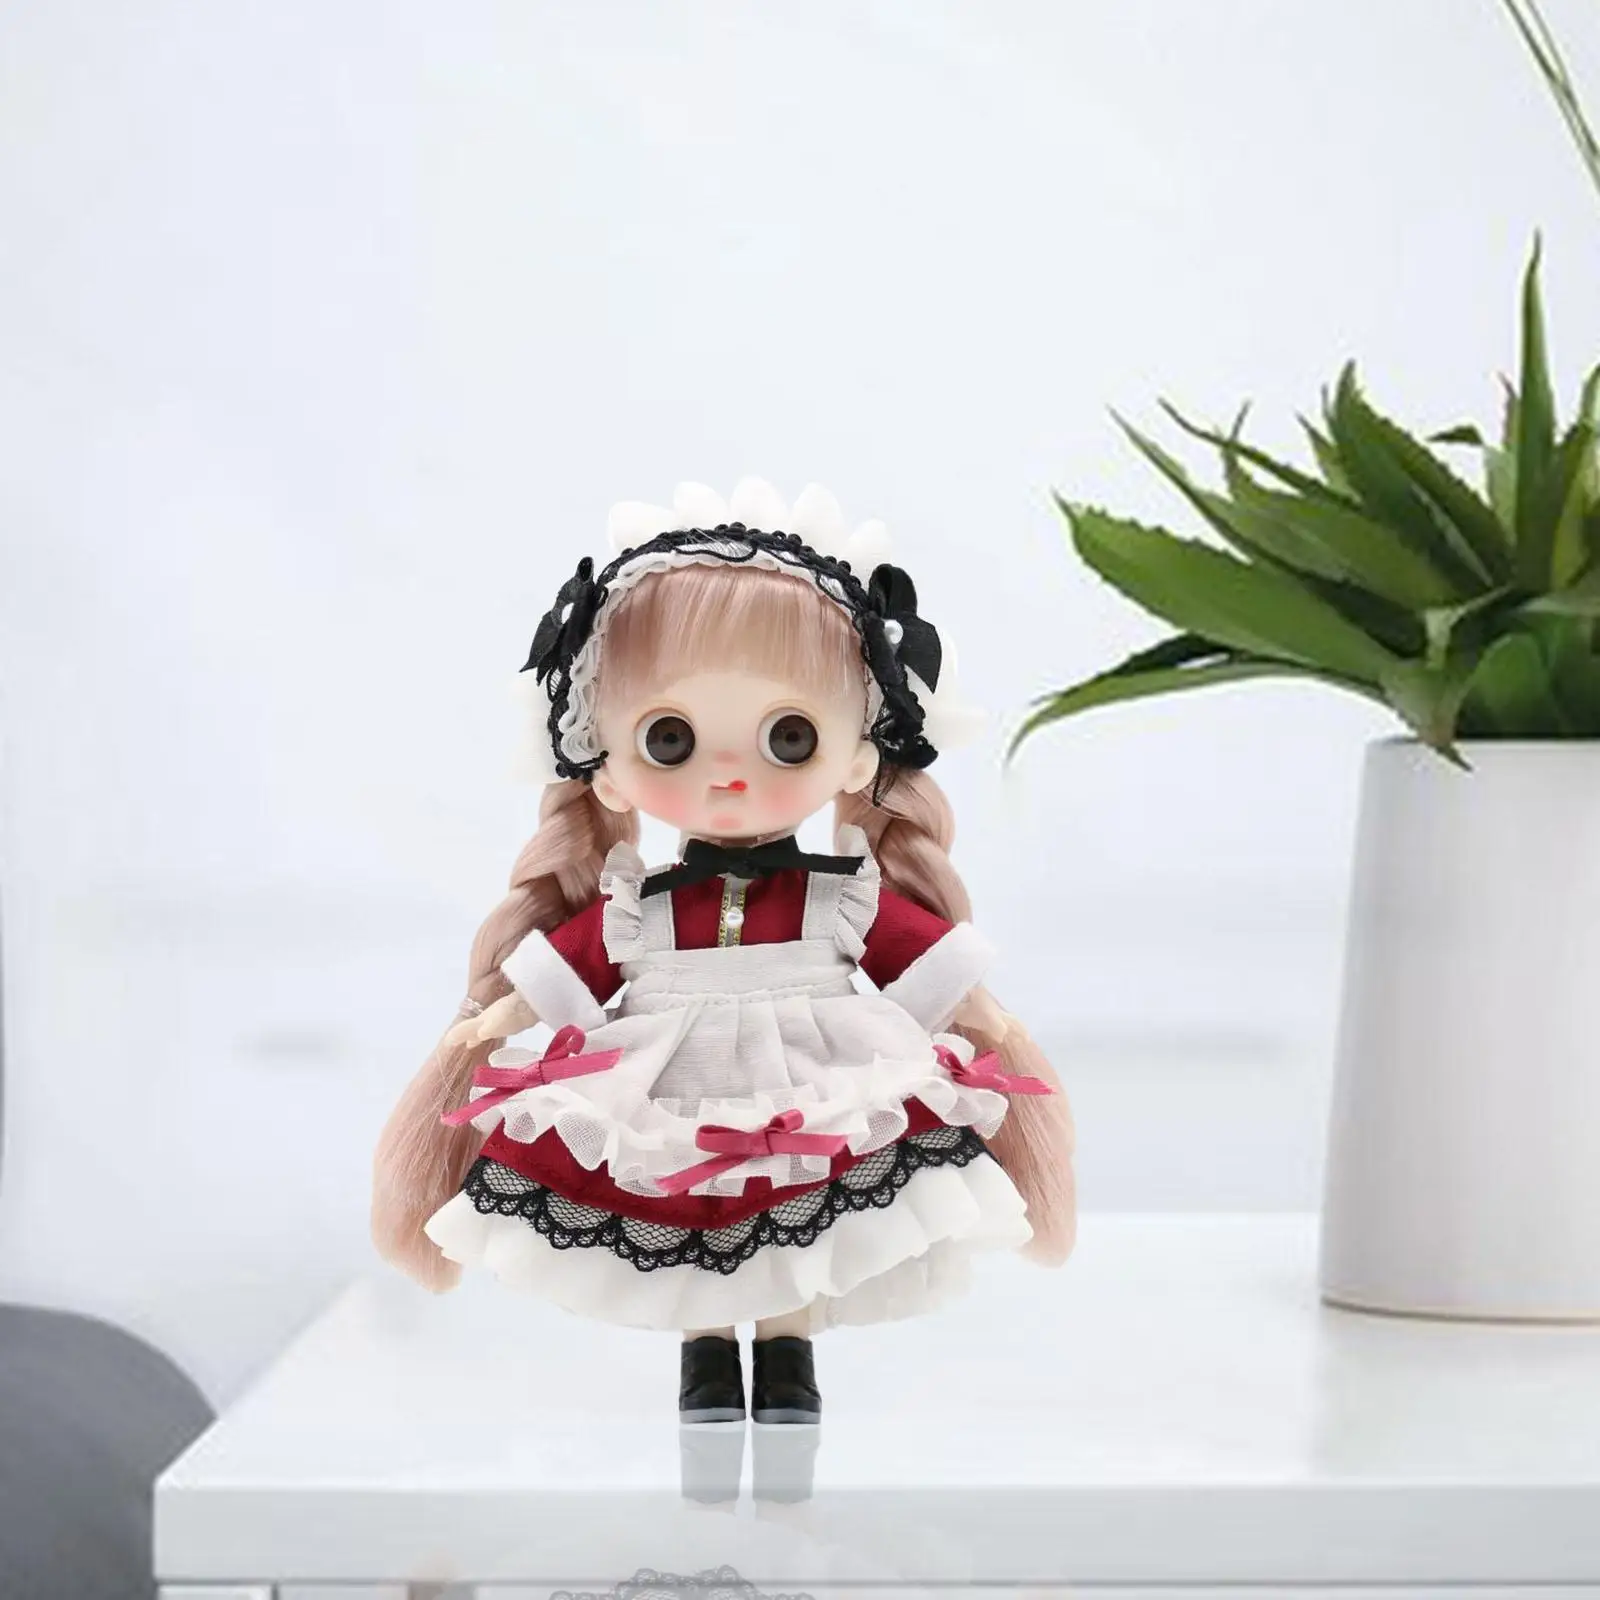 Ball Jointed Baby Doll Bendable Little Doll Fashion Dress DIY Toy Dress up Accessories Makeup Doll for Graduation Birthday Gifts